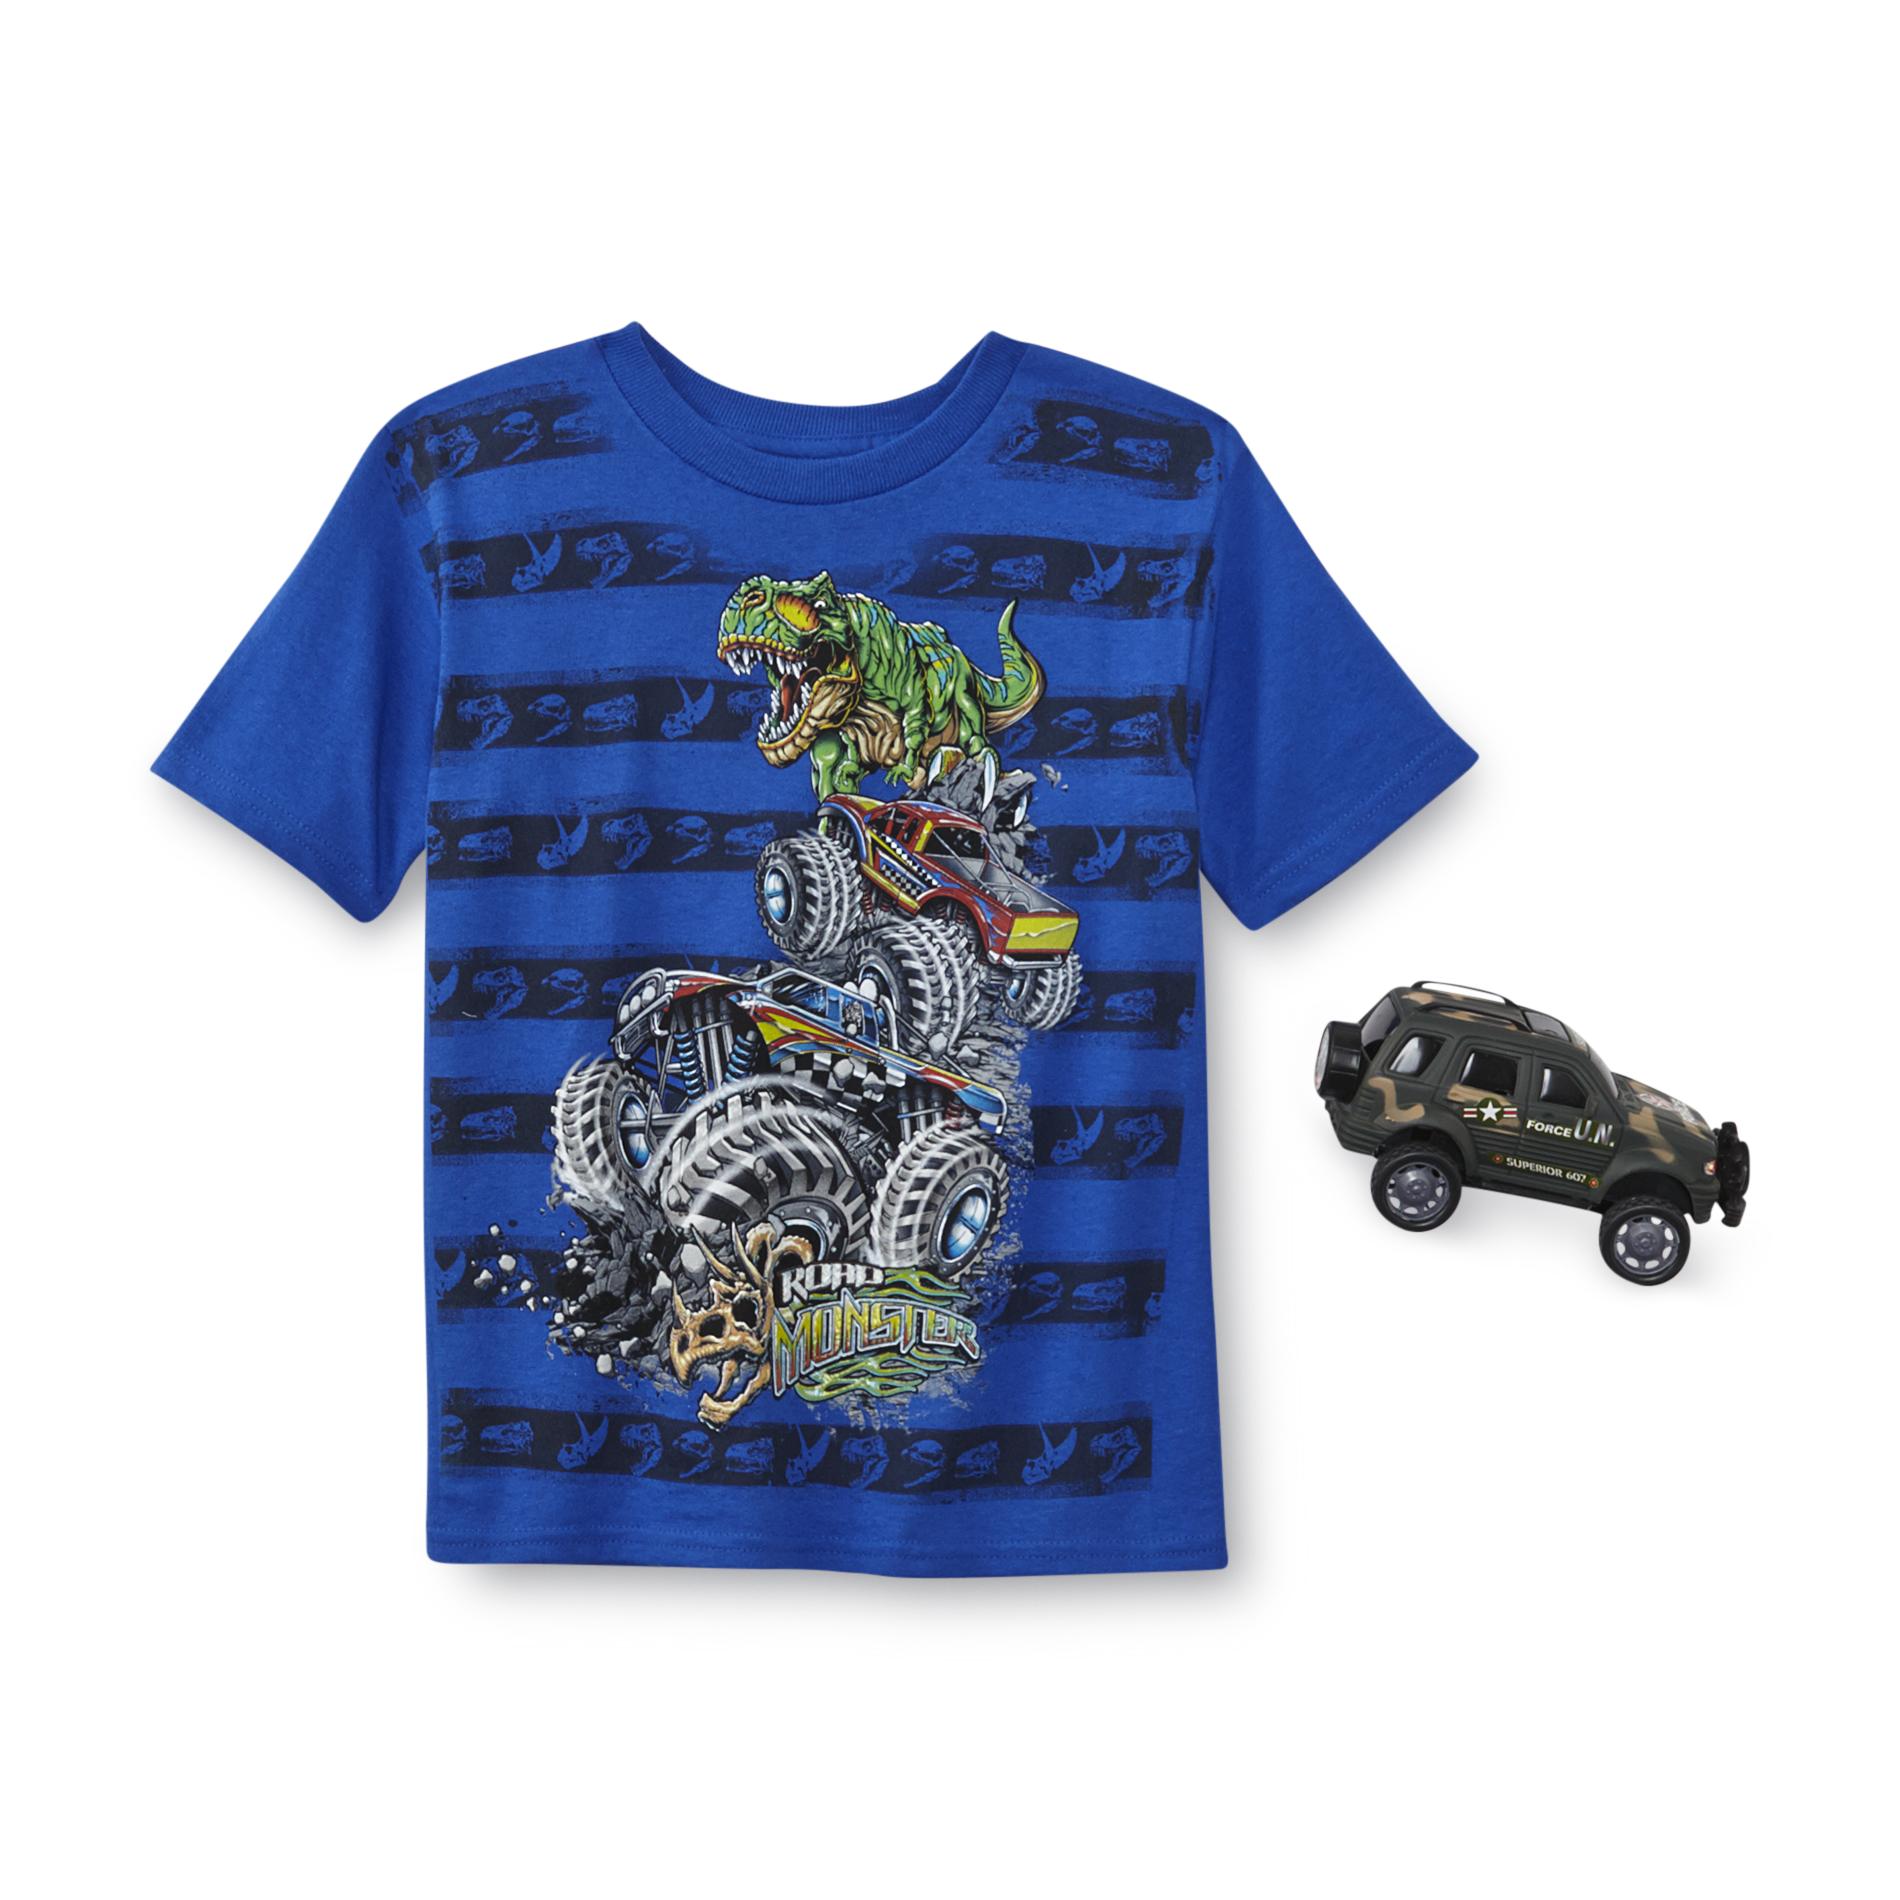 Boy's Graphic T-Shirt & Truck Toy - Road Monster